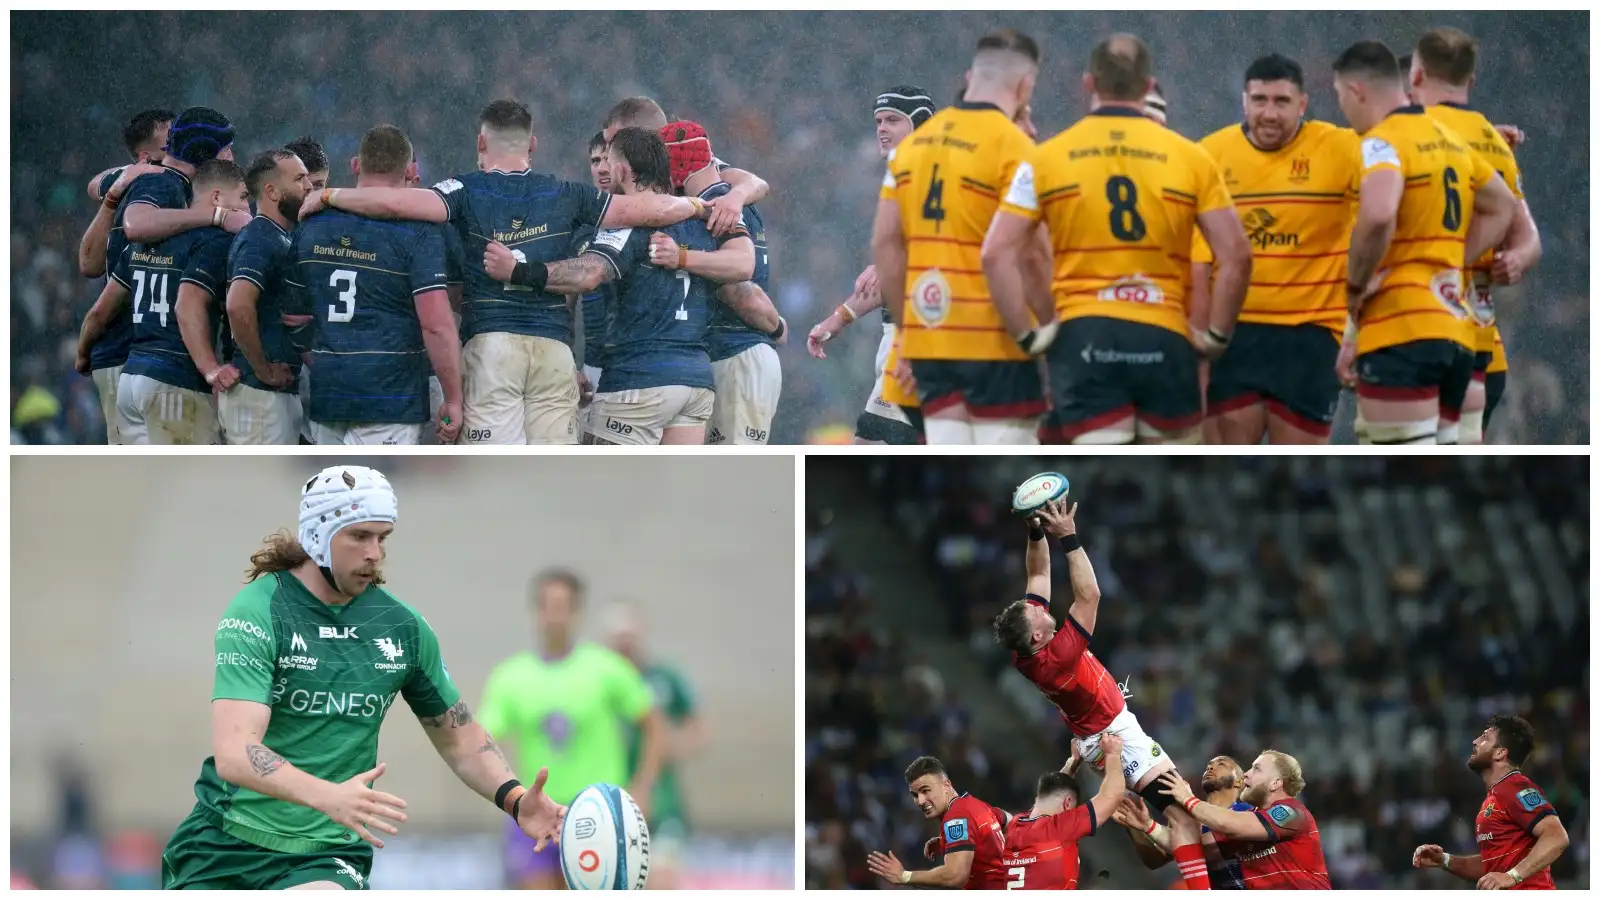 United Rugby Championship: Split with Leinster and Ulster, Connacht and Munster